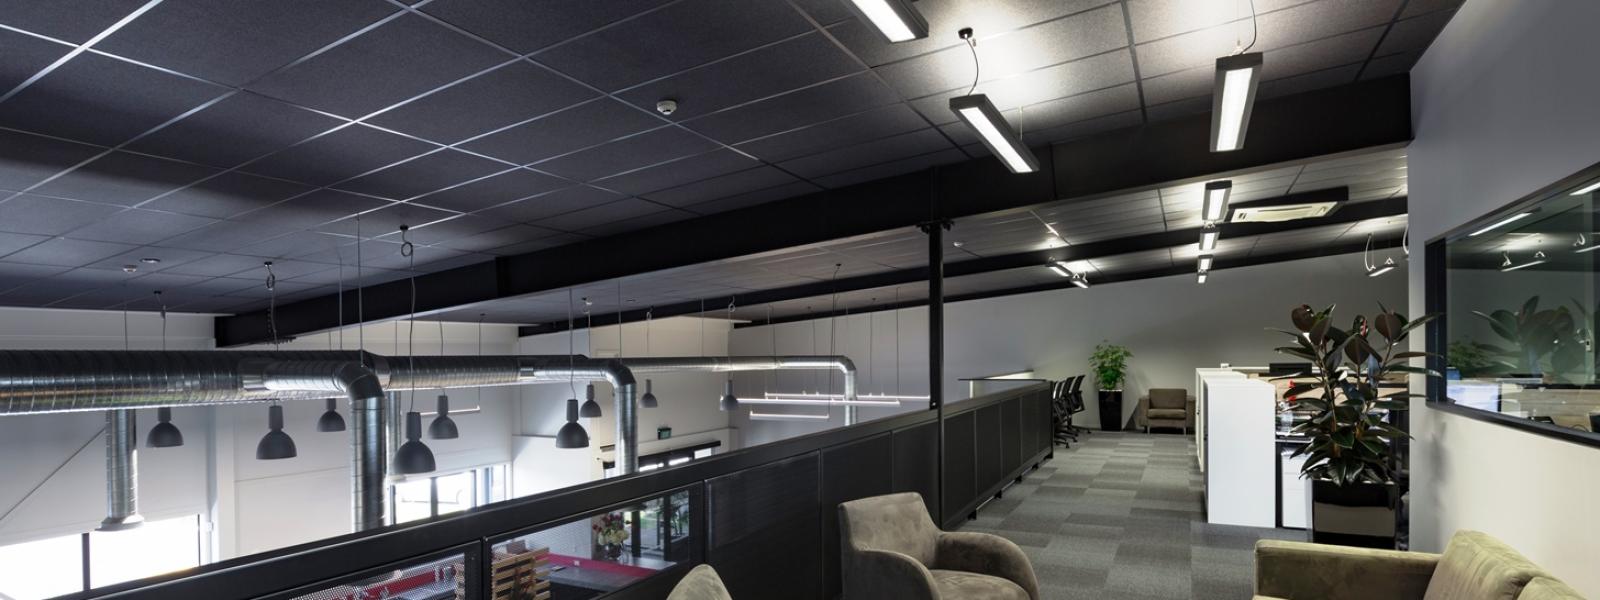 Suspended Ceiling Tile Installation